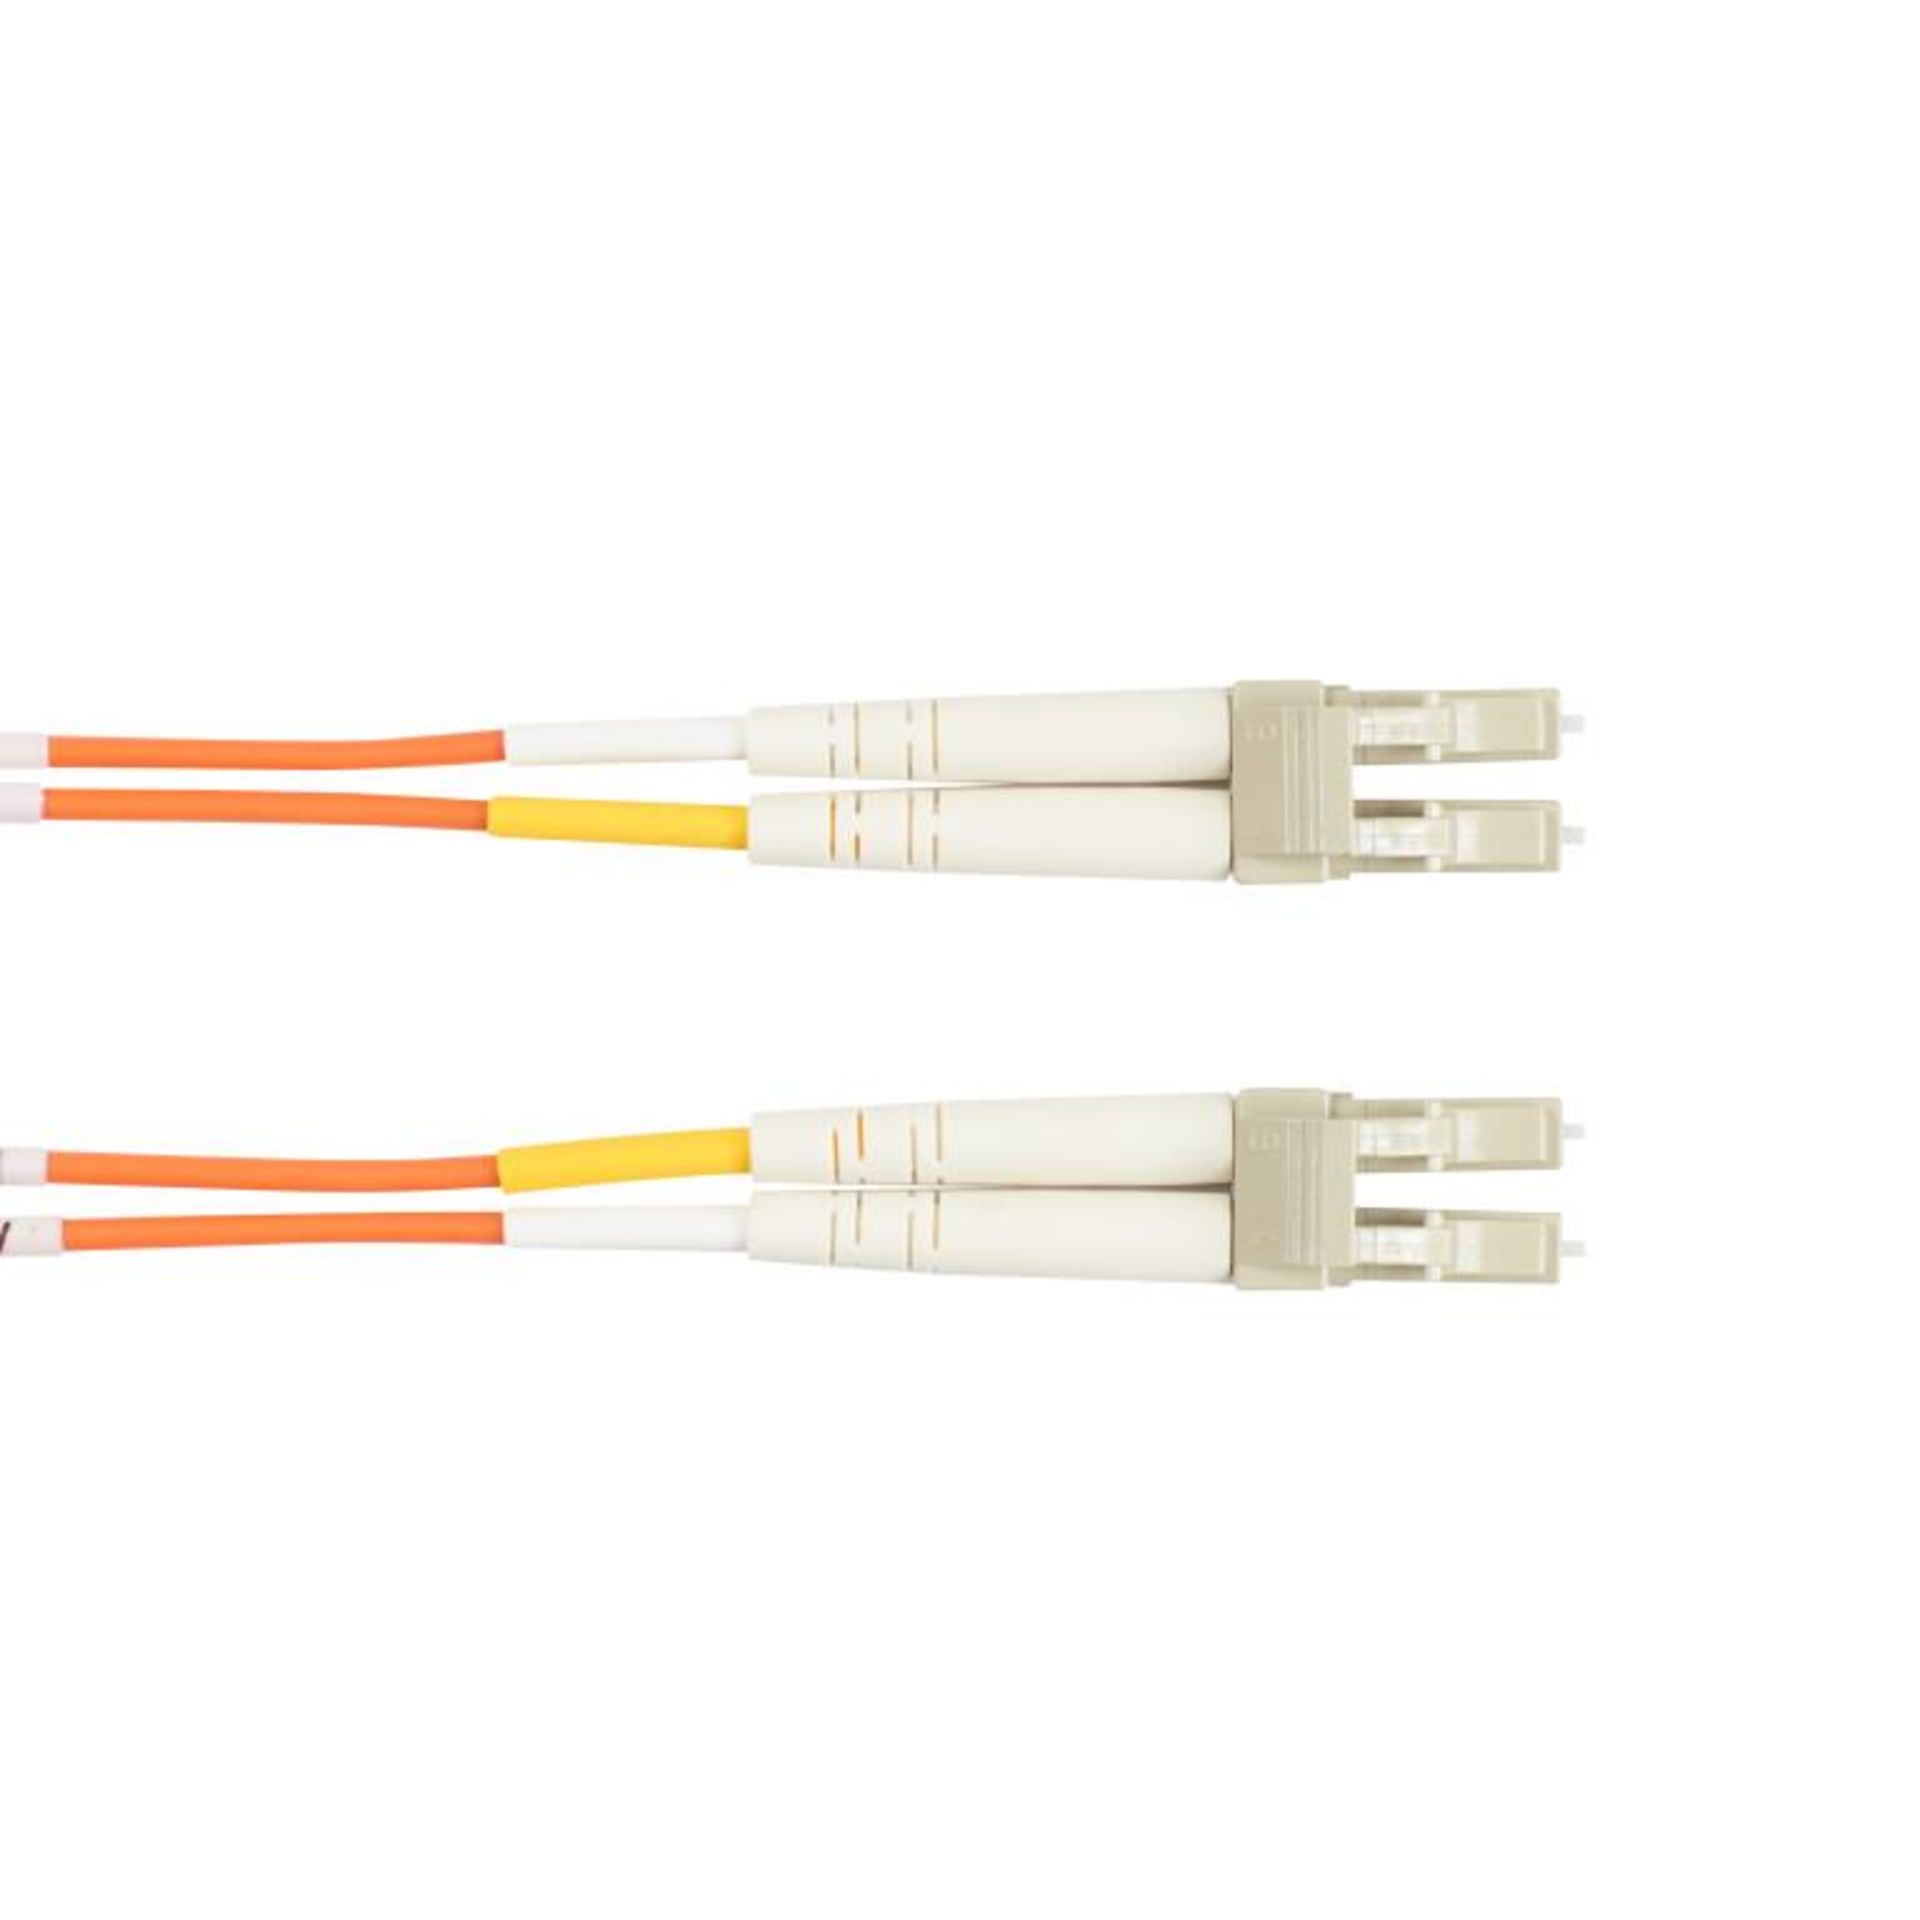 Fiber Optic Multimode Patch Cables, Assorted Lengths, 5M-15M